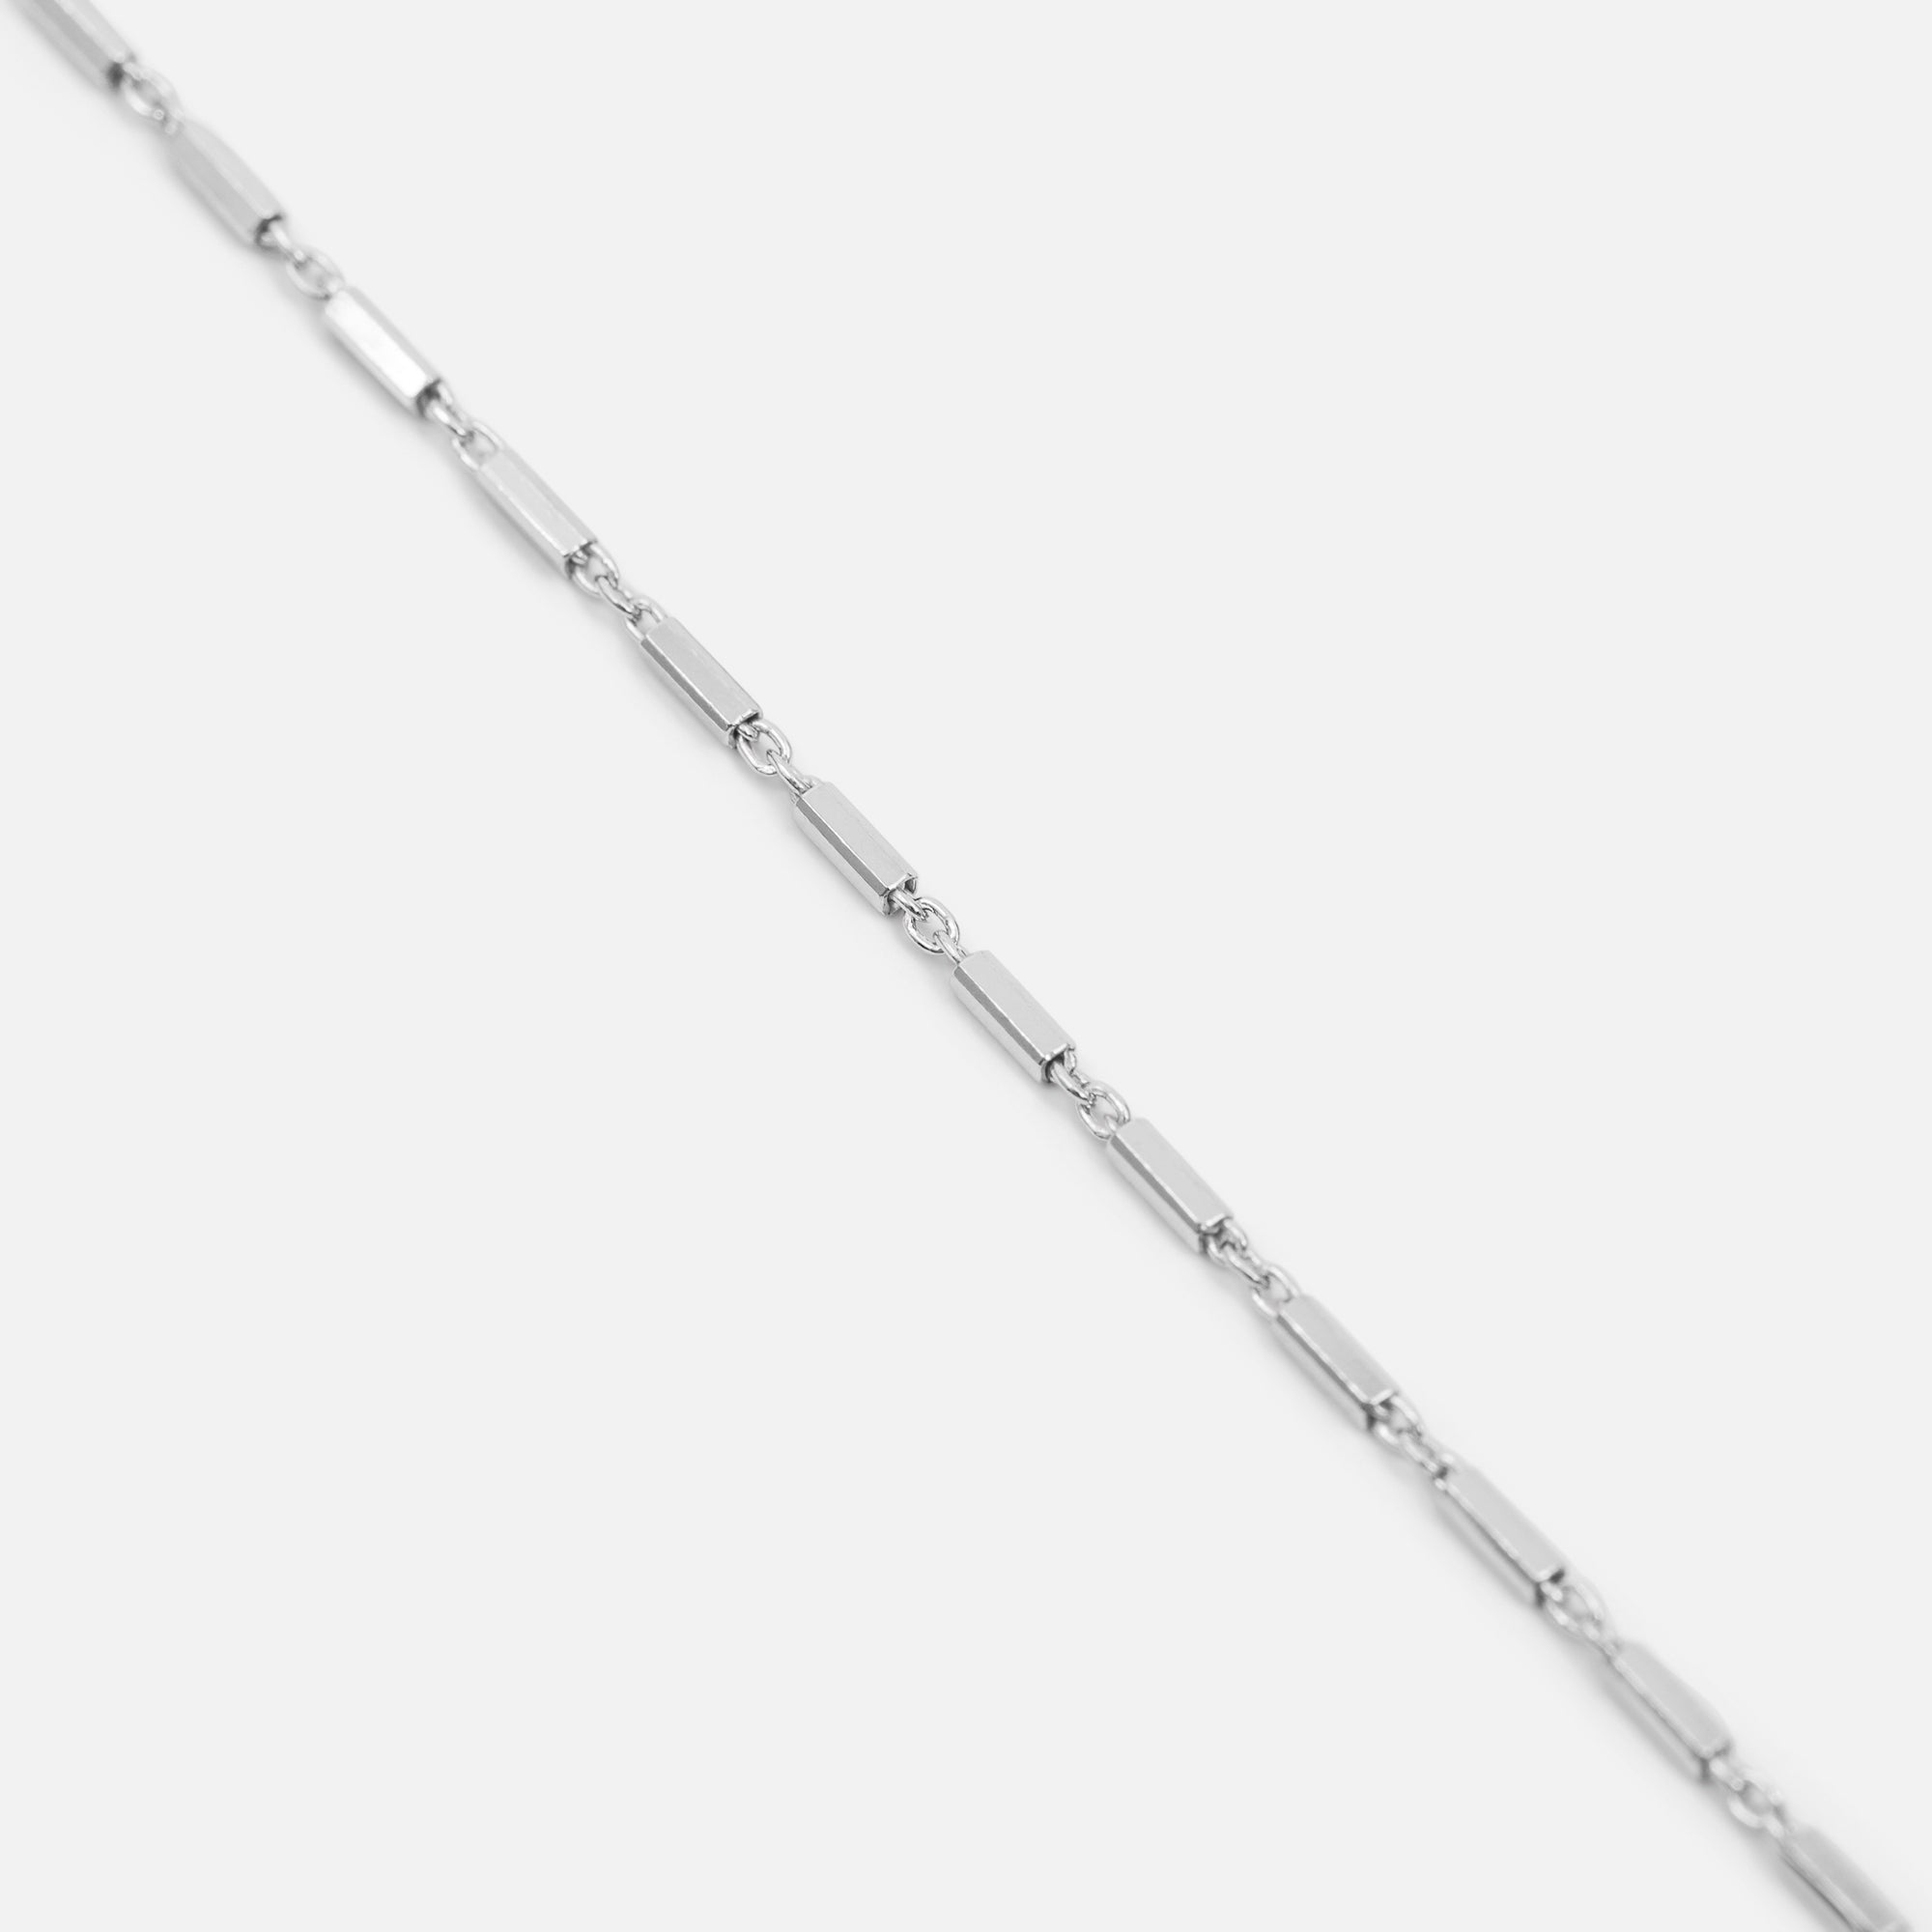 9.5 inch sterling silver thin anklet chain